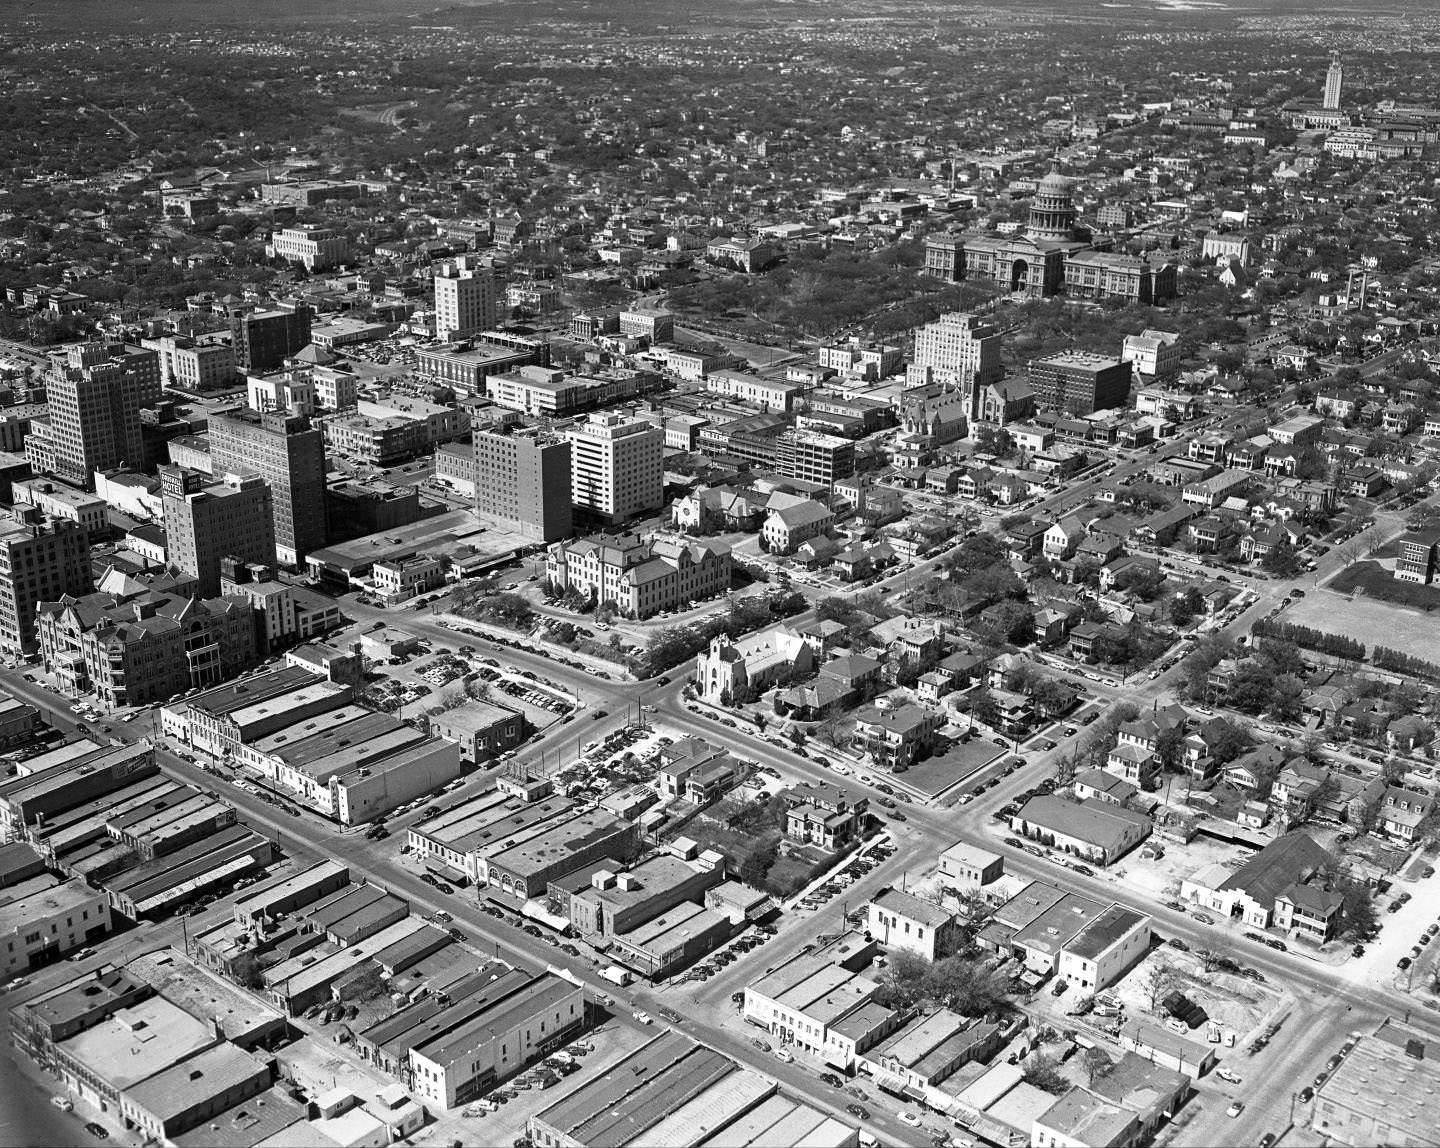 From the southeast of the State Capitol, an aerial shot of downtown Austin, The Driskill, Captiol and UT Tower all in view, 1959